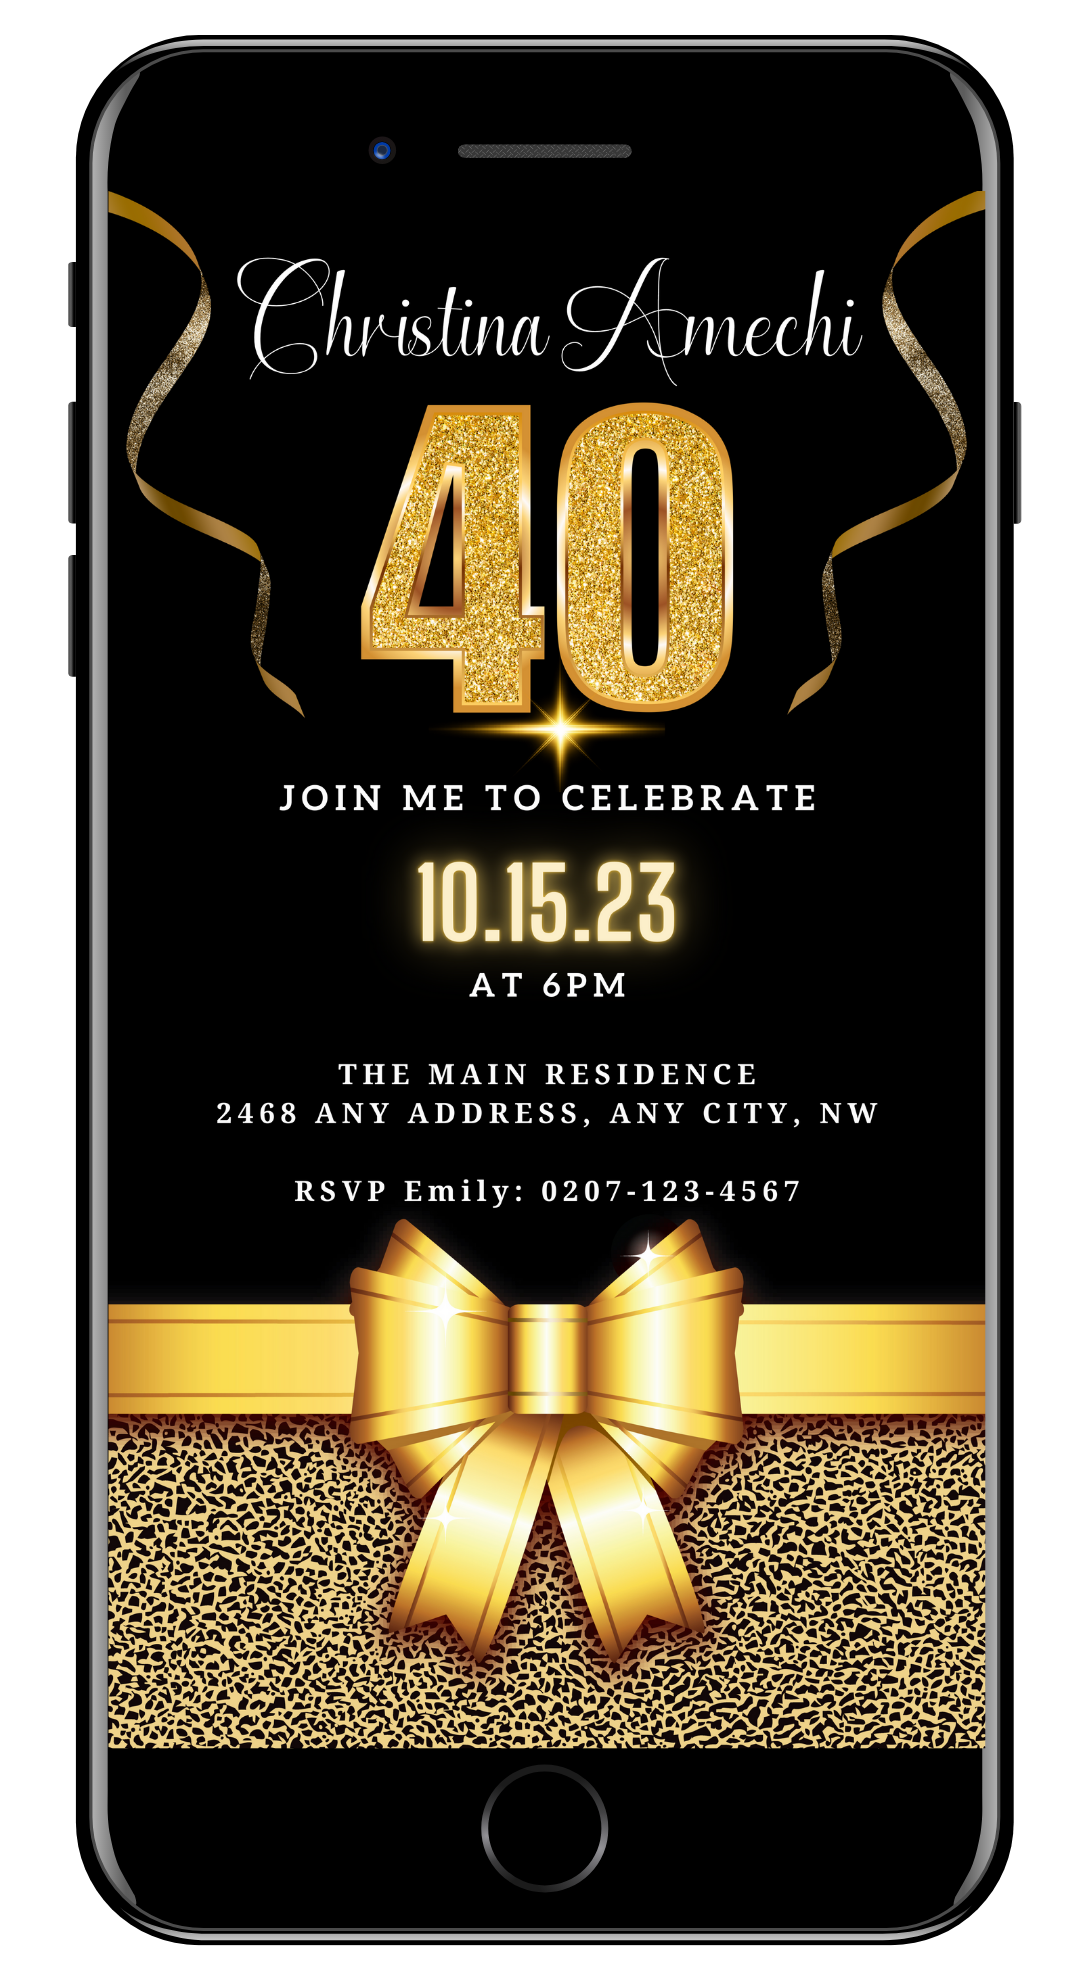 Customizable Digital Black Gold Leopard 40th Birthday Evite displayed on a smartphone screen with a gold ribbon and bow, ready for personalization via Canva.